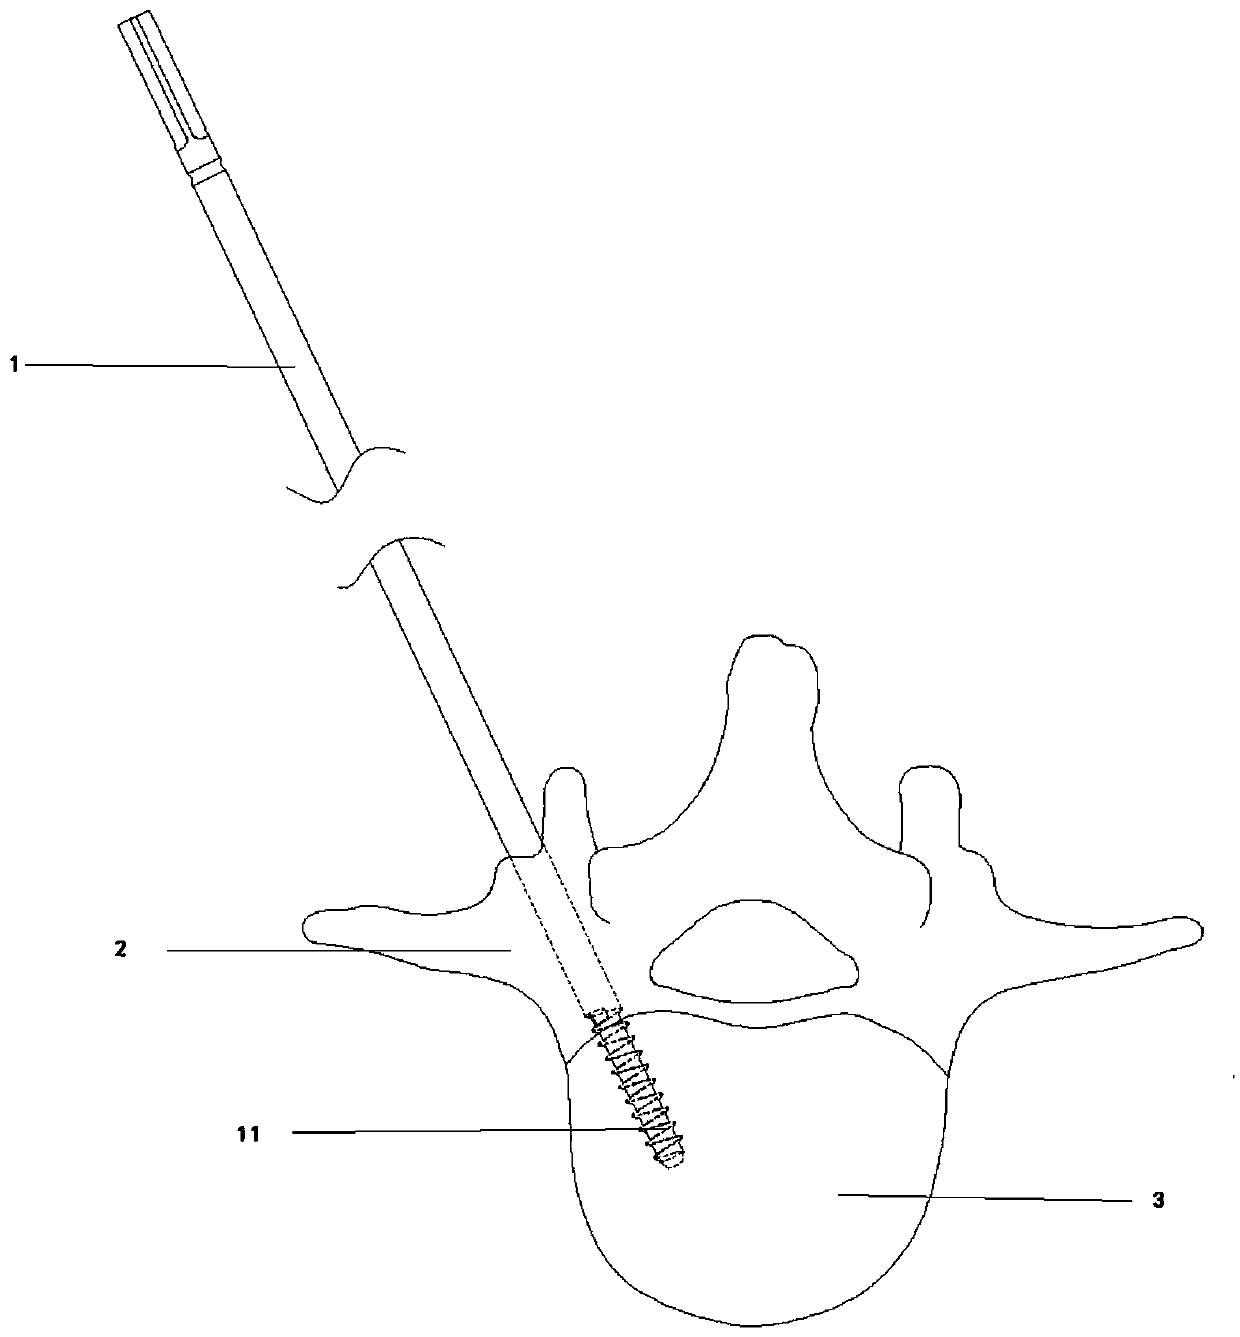 Minimally invasive facetectomy guiding and positioning device and minimally invasive facetectomy guiding and positioning instrument assembly